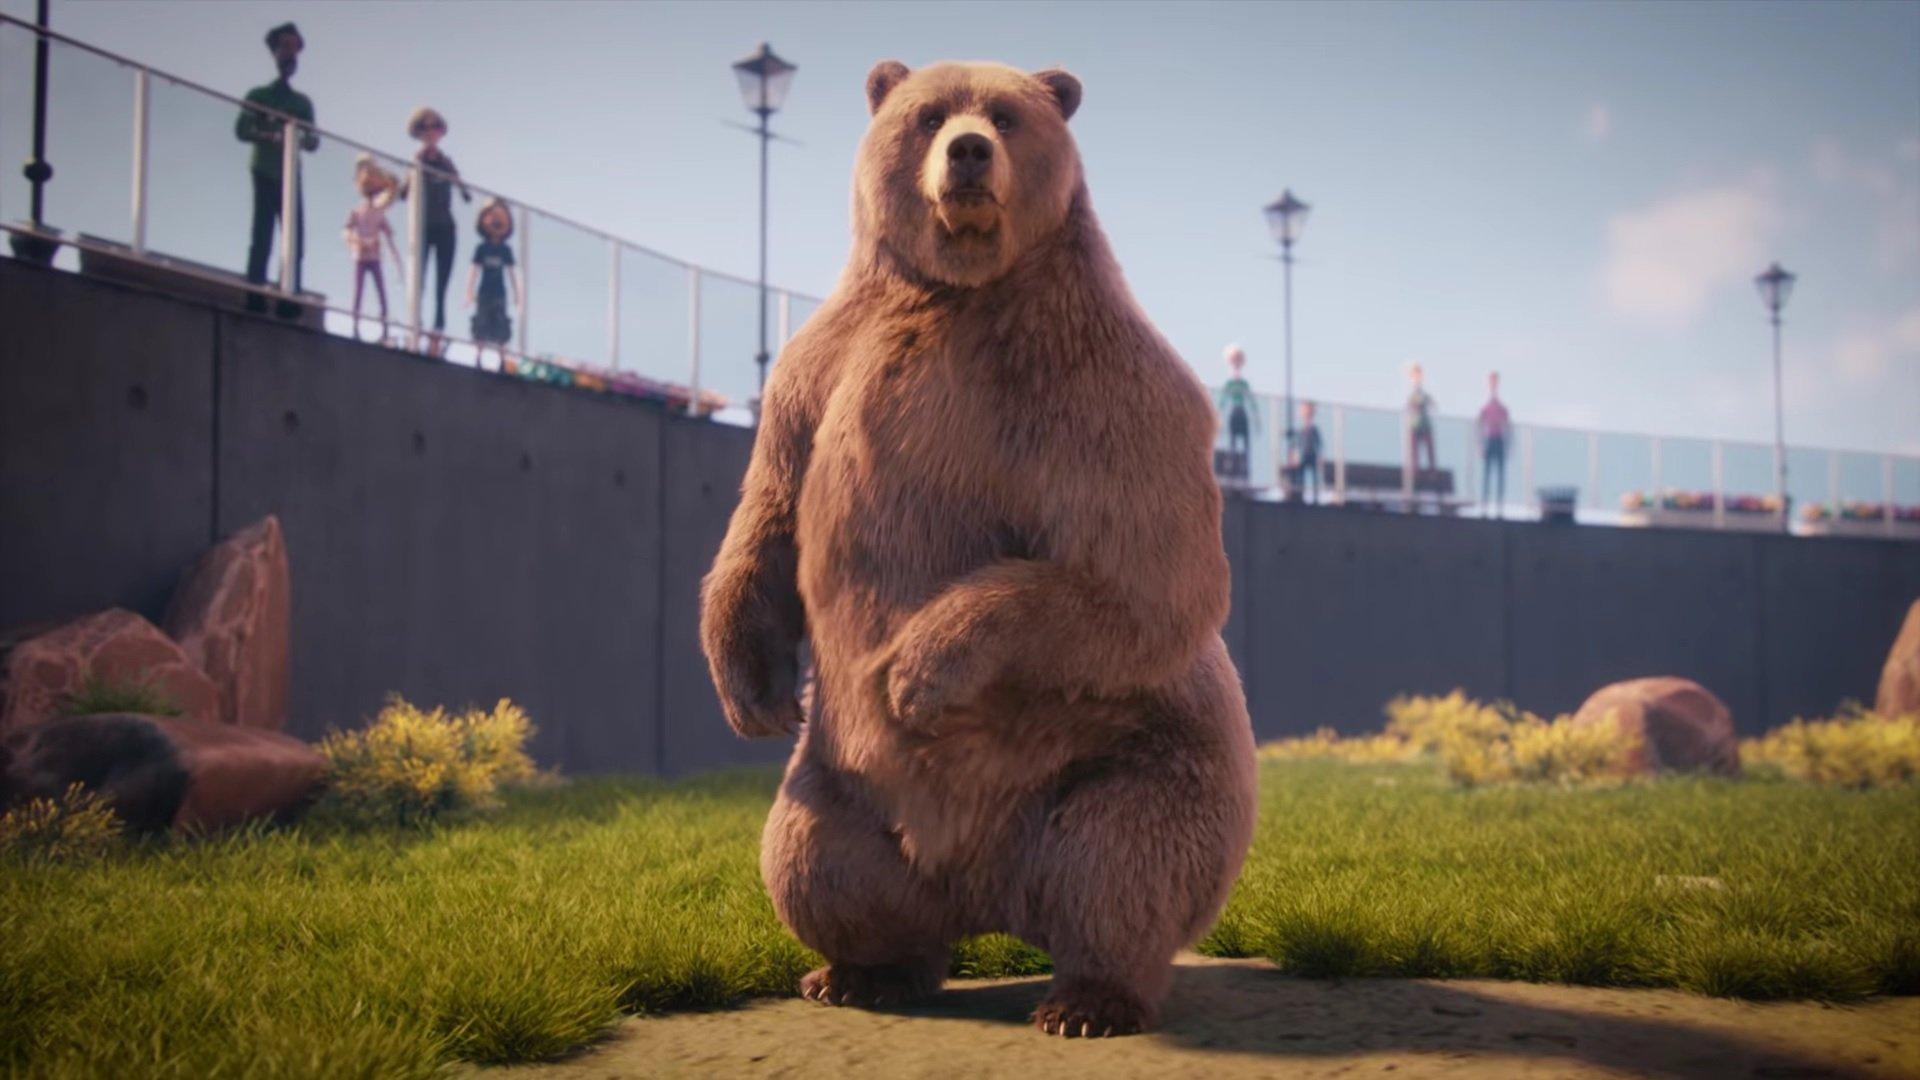 Planet Zoo will let you create your perfect fantasy zoo